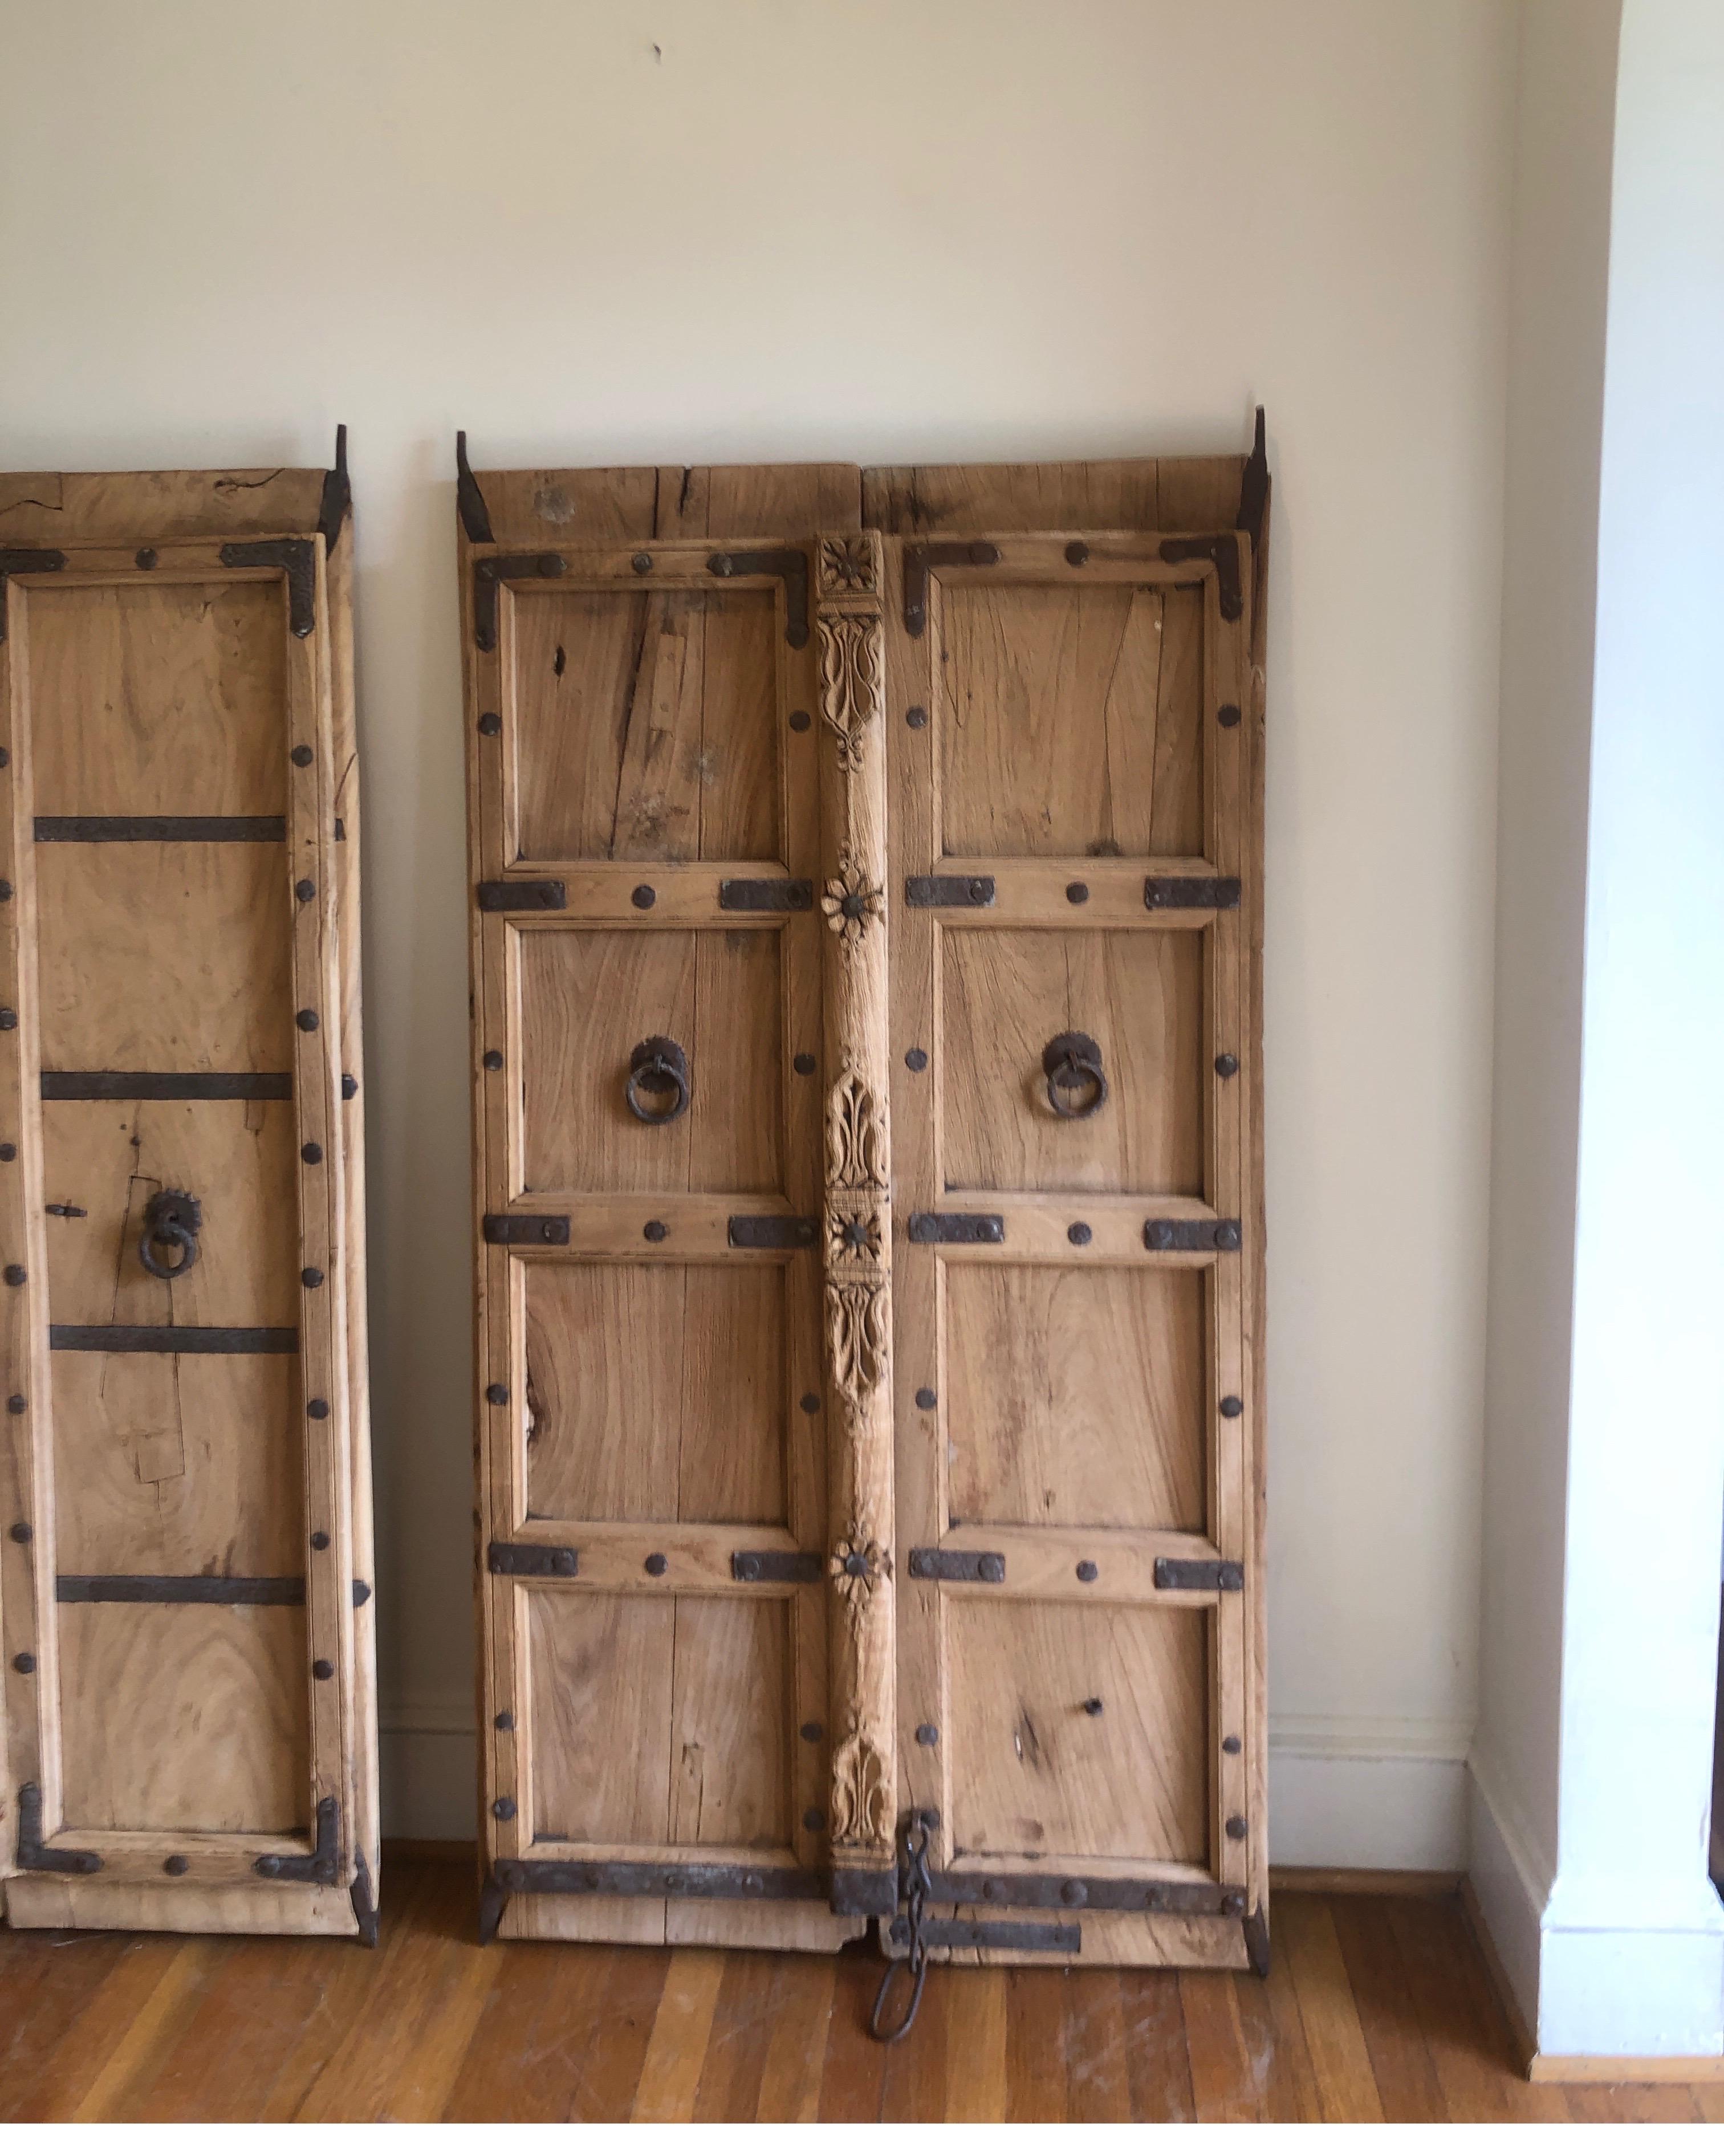 Listing as a pair/set, but we have separate listing for individual pieces, as well.
Hand crafted Teak door in early 20th century. Industrial metal details.
These are salvaged doors that have been barred together to make one larger door/Gate.